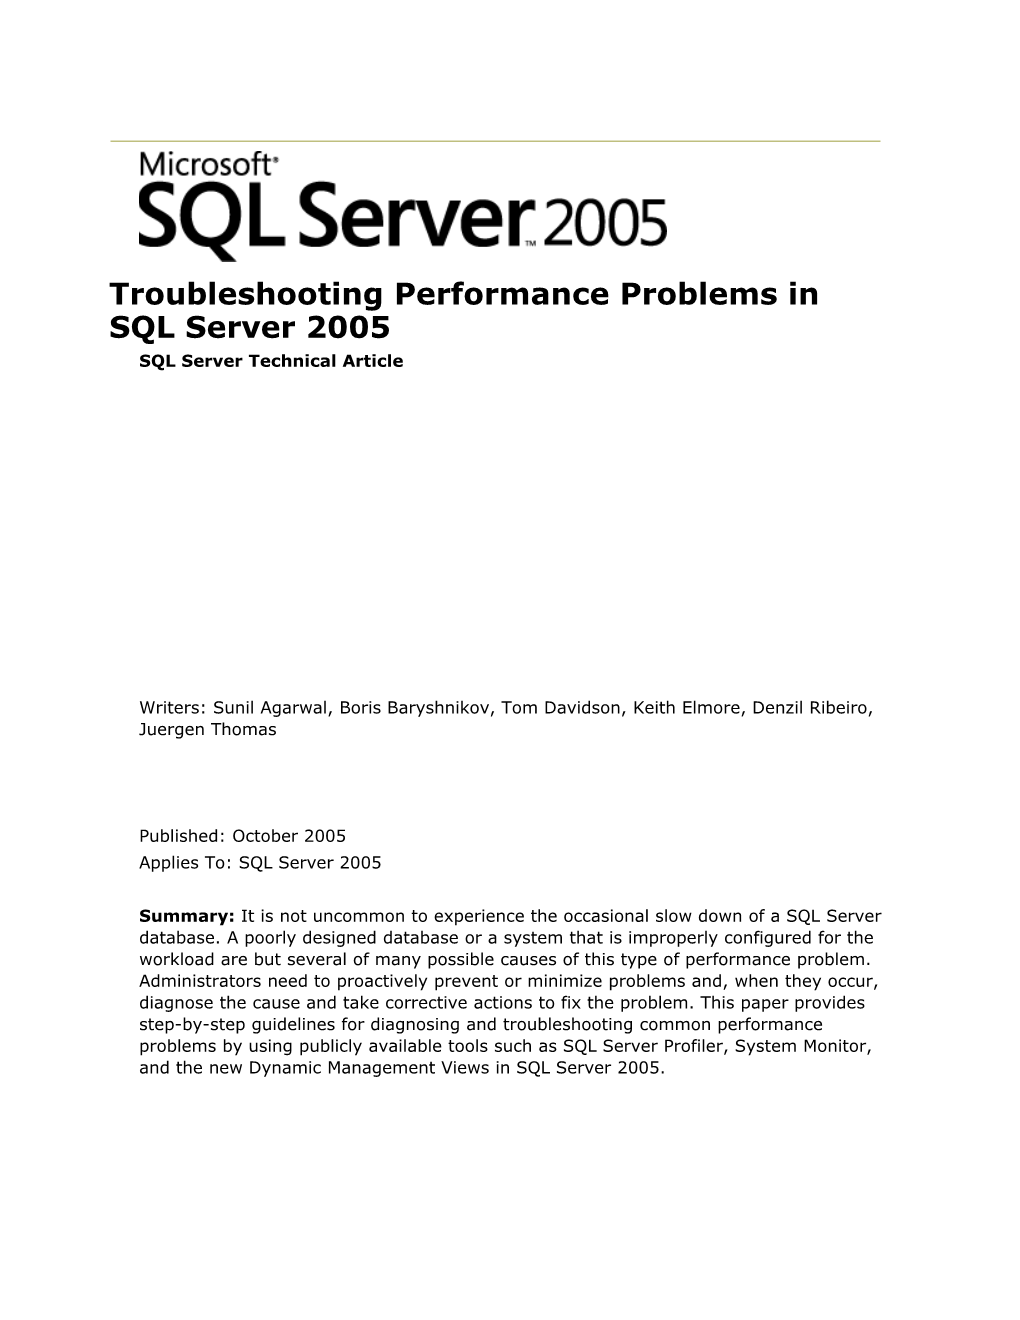 Troubleshooting Performance Problems in SQL Server 2005